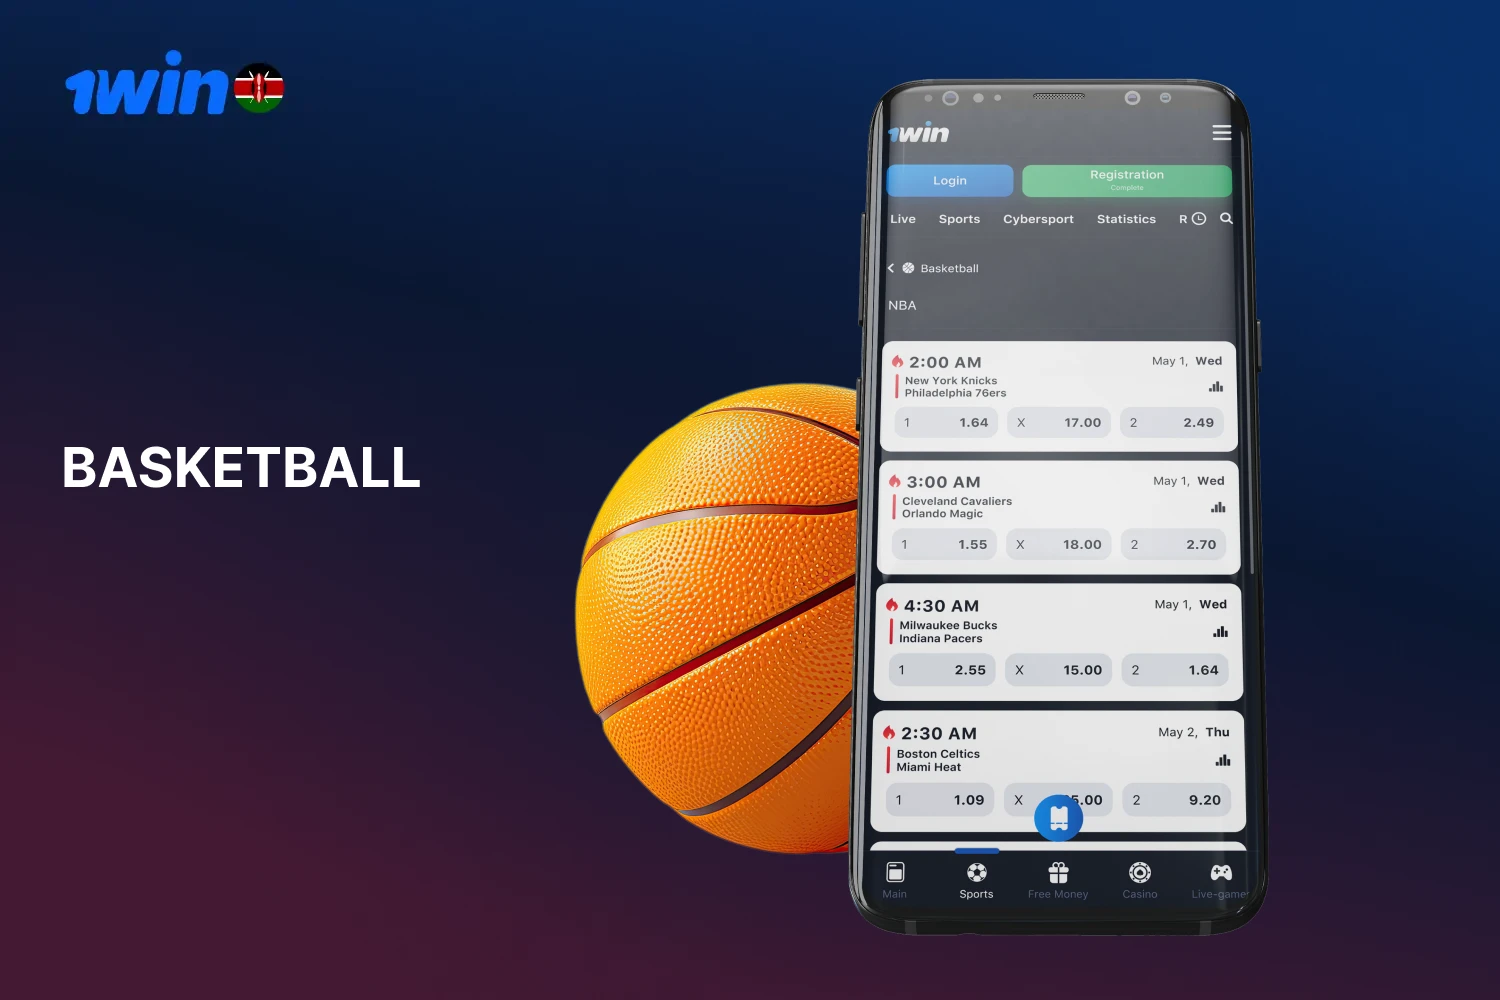 Players from Kenya can find over 70 basketball match events on the 1win website